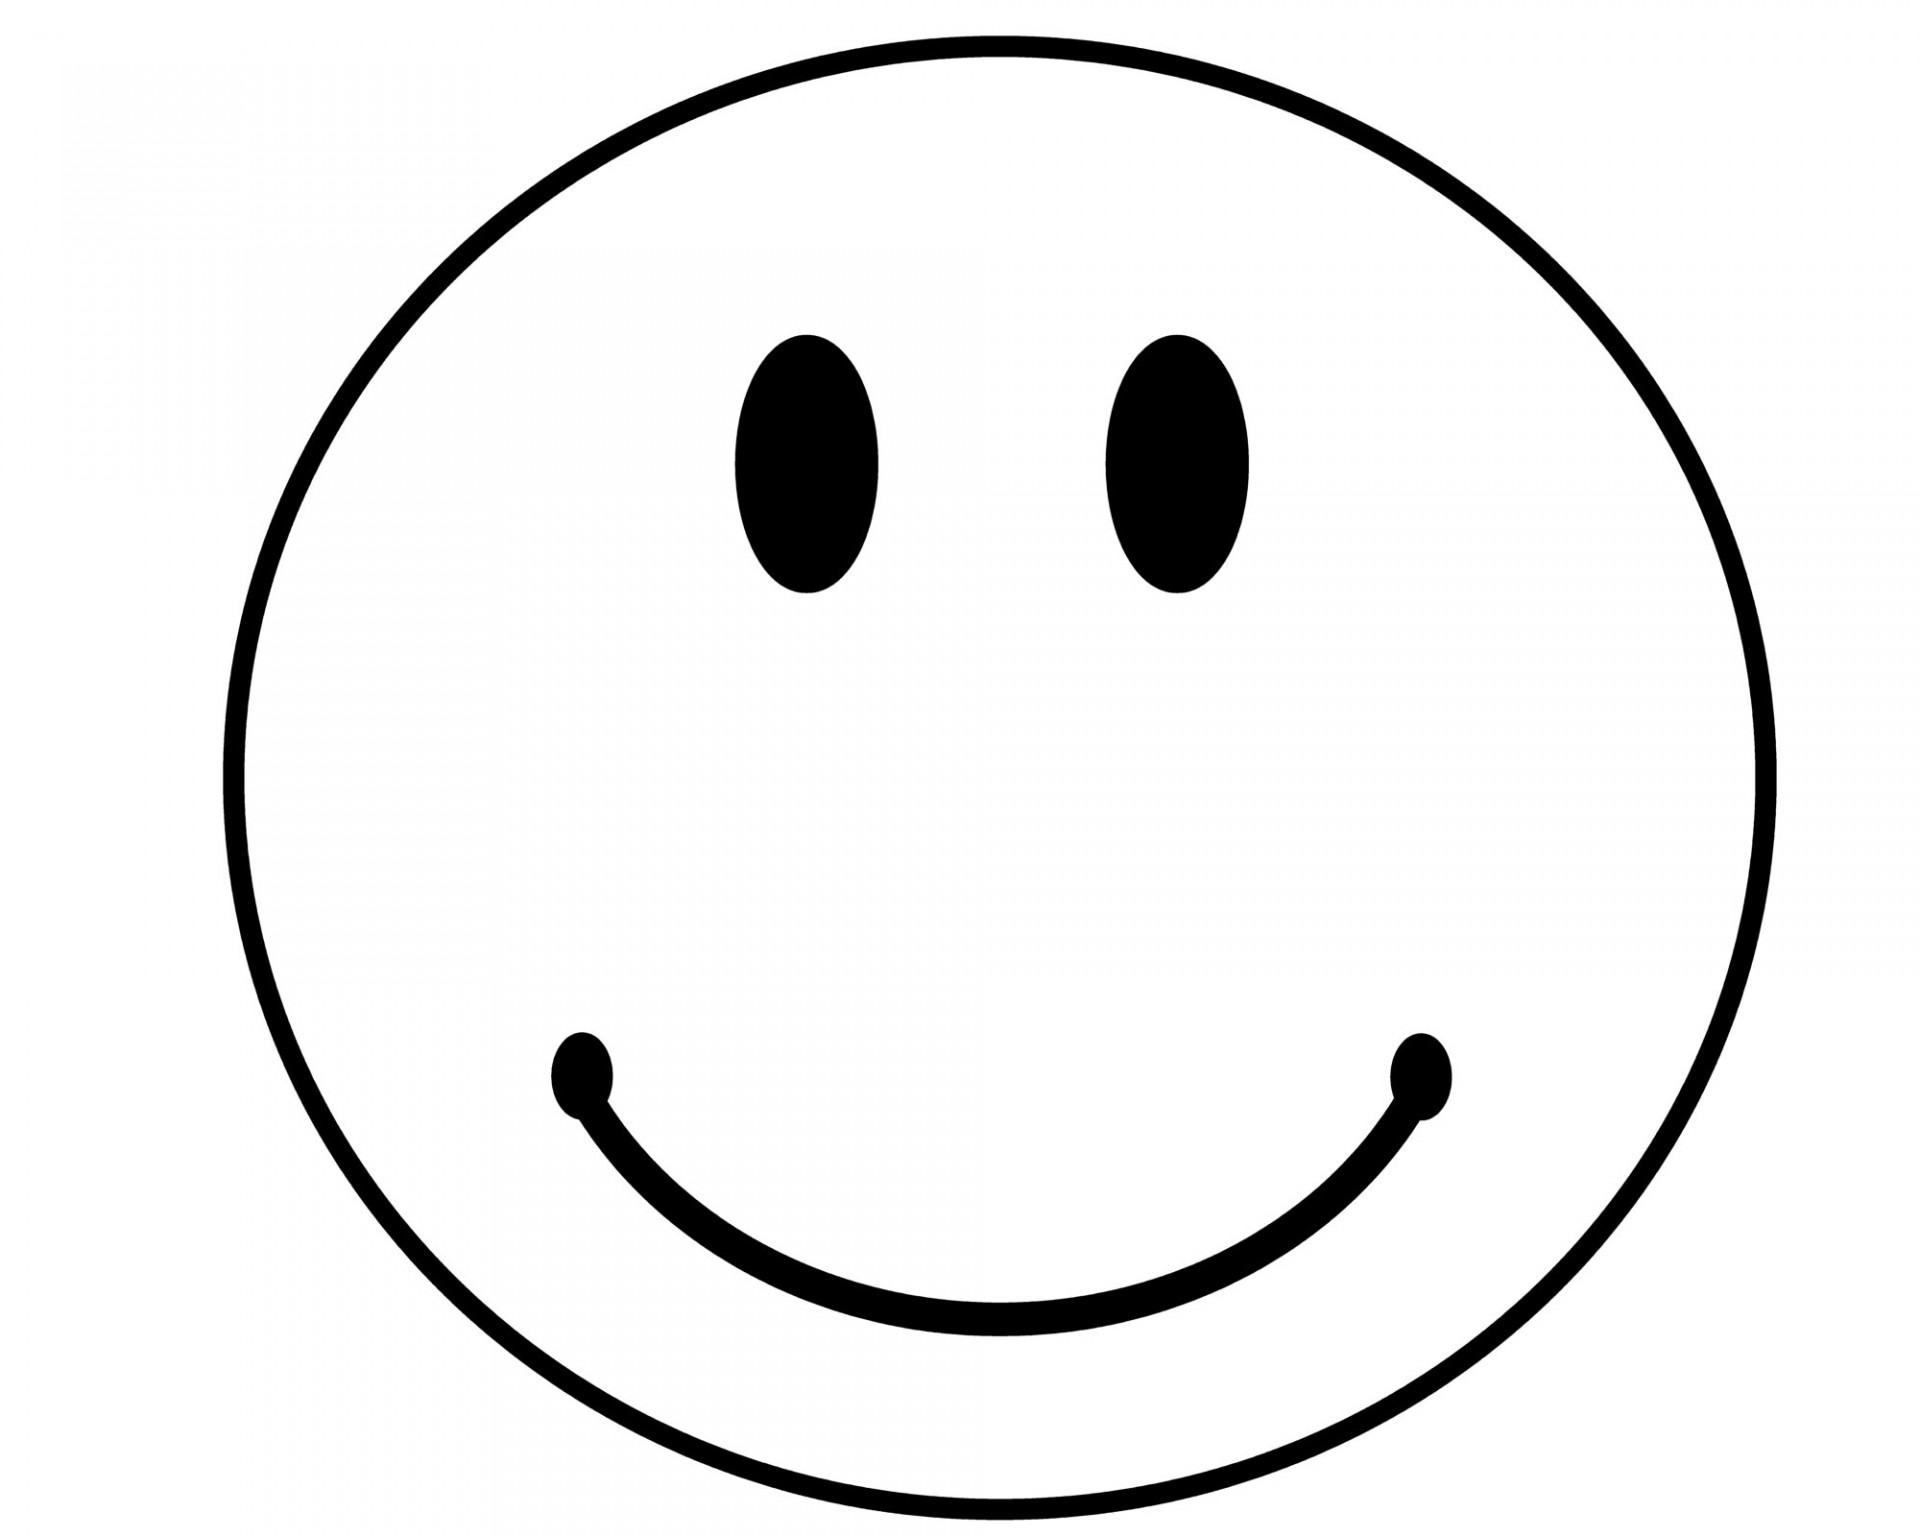 ... Free Images Of Smiley Fac